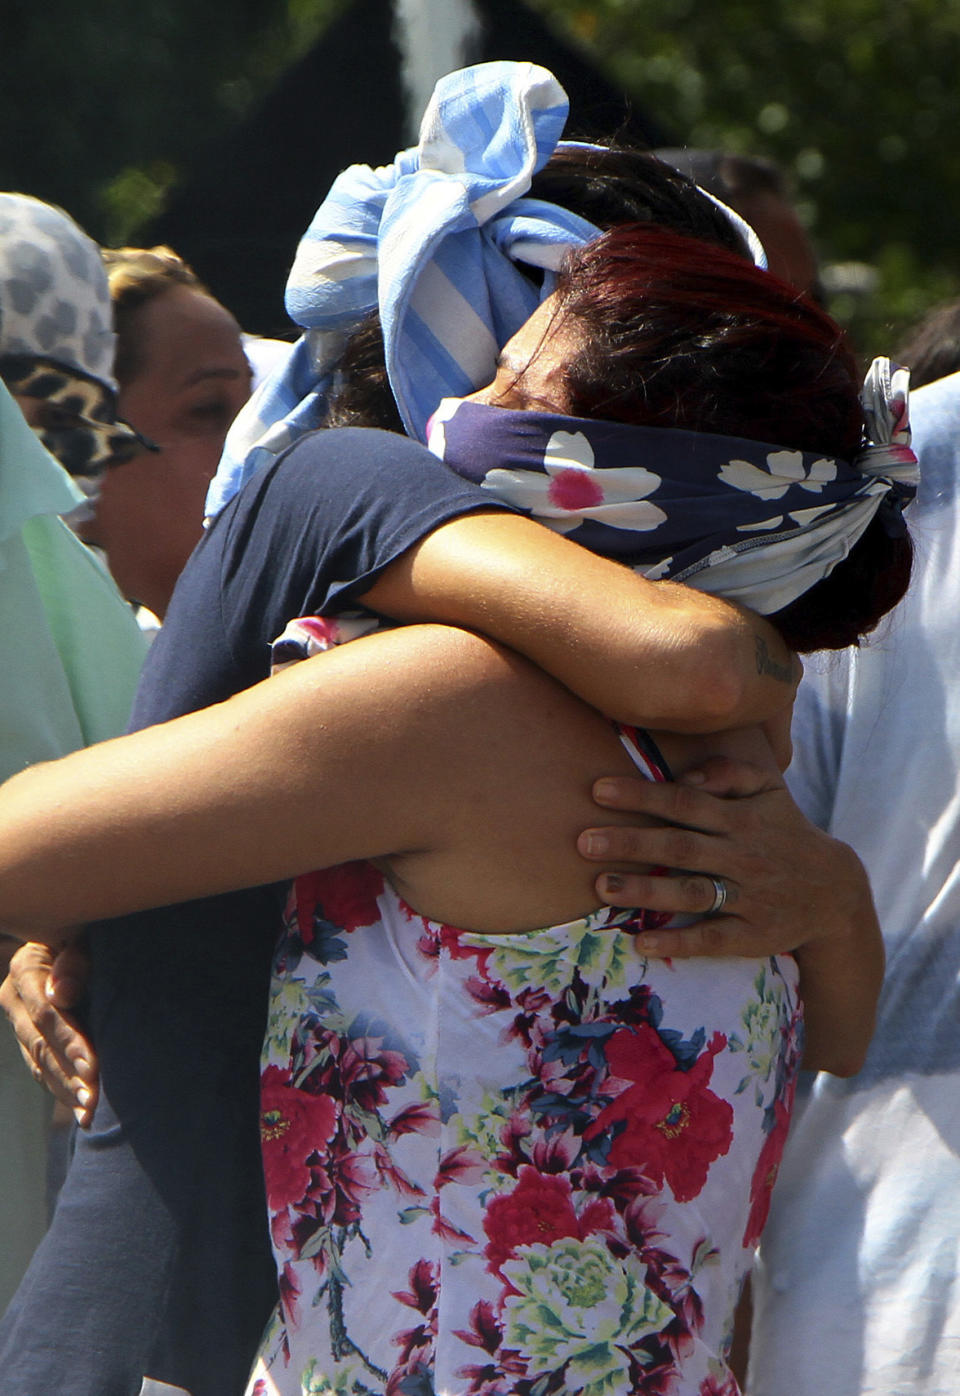 Women who cover their faces so as not to be identifiable by the press and police embrace outside Anisio Jobim Prison Complex after a deadly riot erupted among inmates in Manaus in the northern state of Amazonas, Brazil, Sunday, May 26, 2019. A statement from the state prison secretary says prisoners began fighting among themselves around noon Sunday, and security reinforcements were rushed to complex. (AP Photo/Edmar Barros)